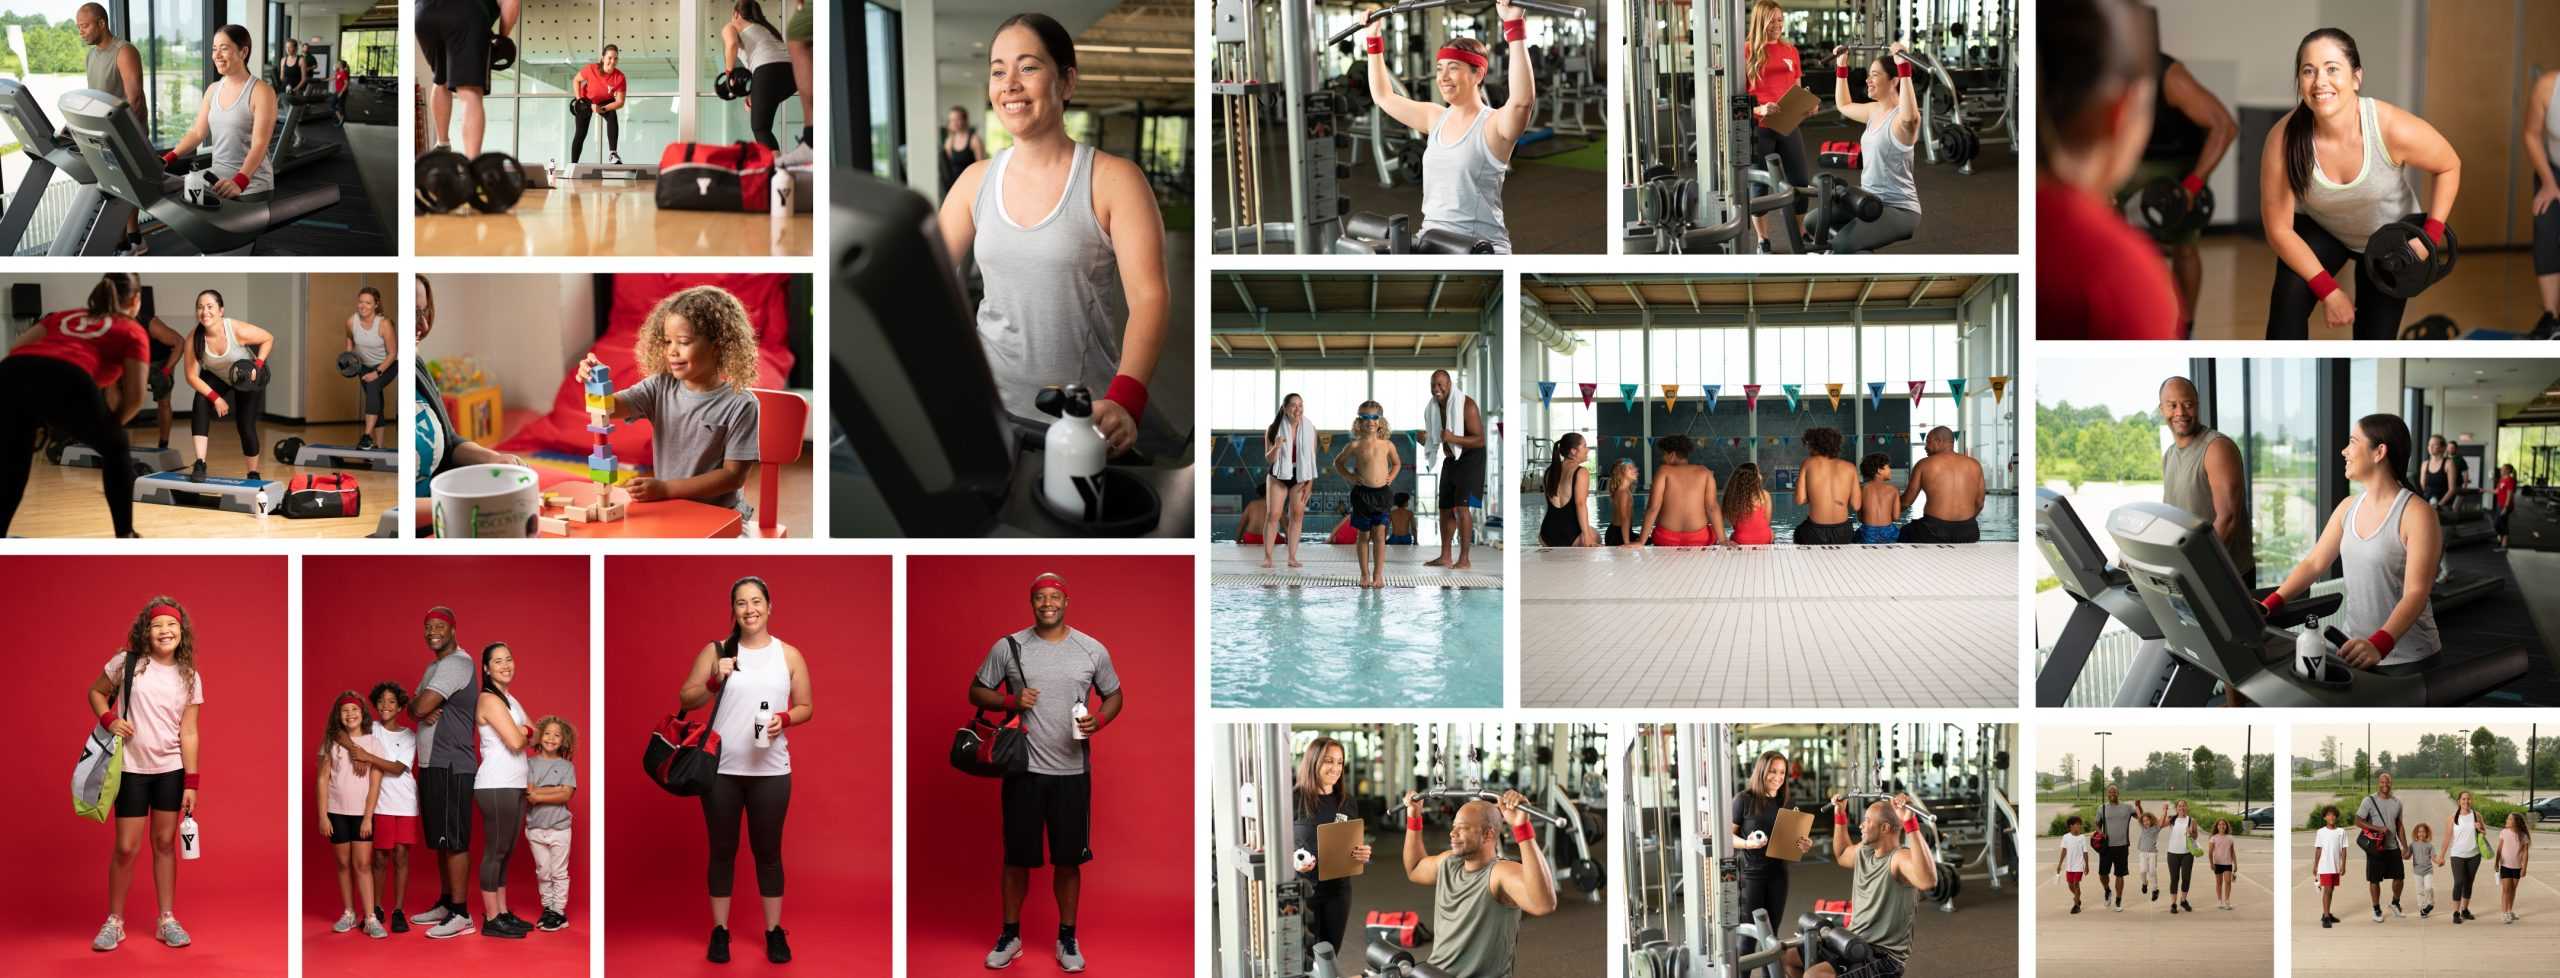 various photos of men and women exercising and families at the YMCA